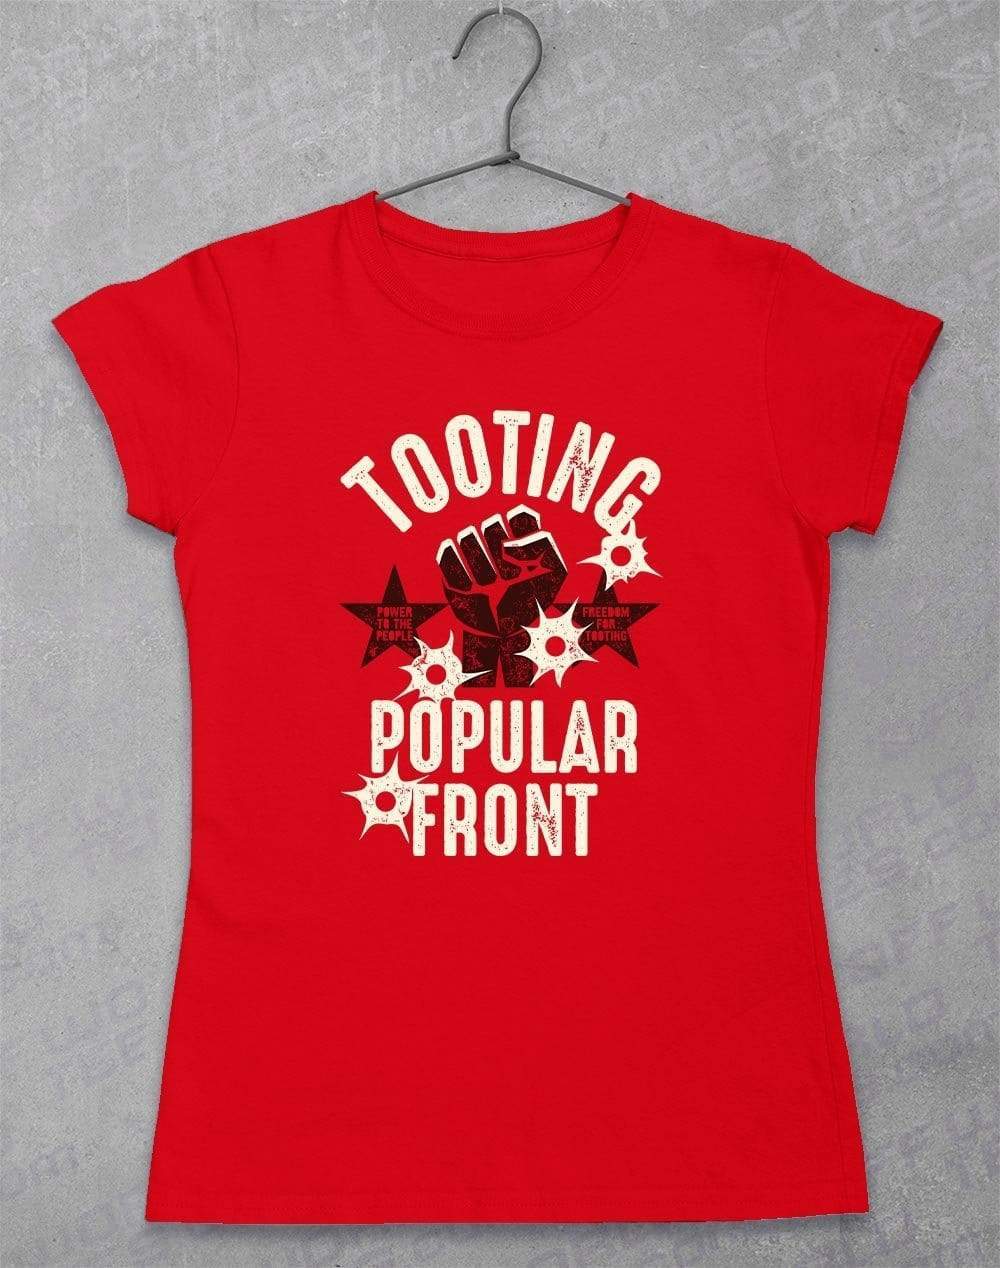 Tooting Popular Front Women's T-Shirt 8-10 / Red  - Off World Tees